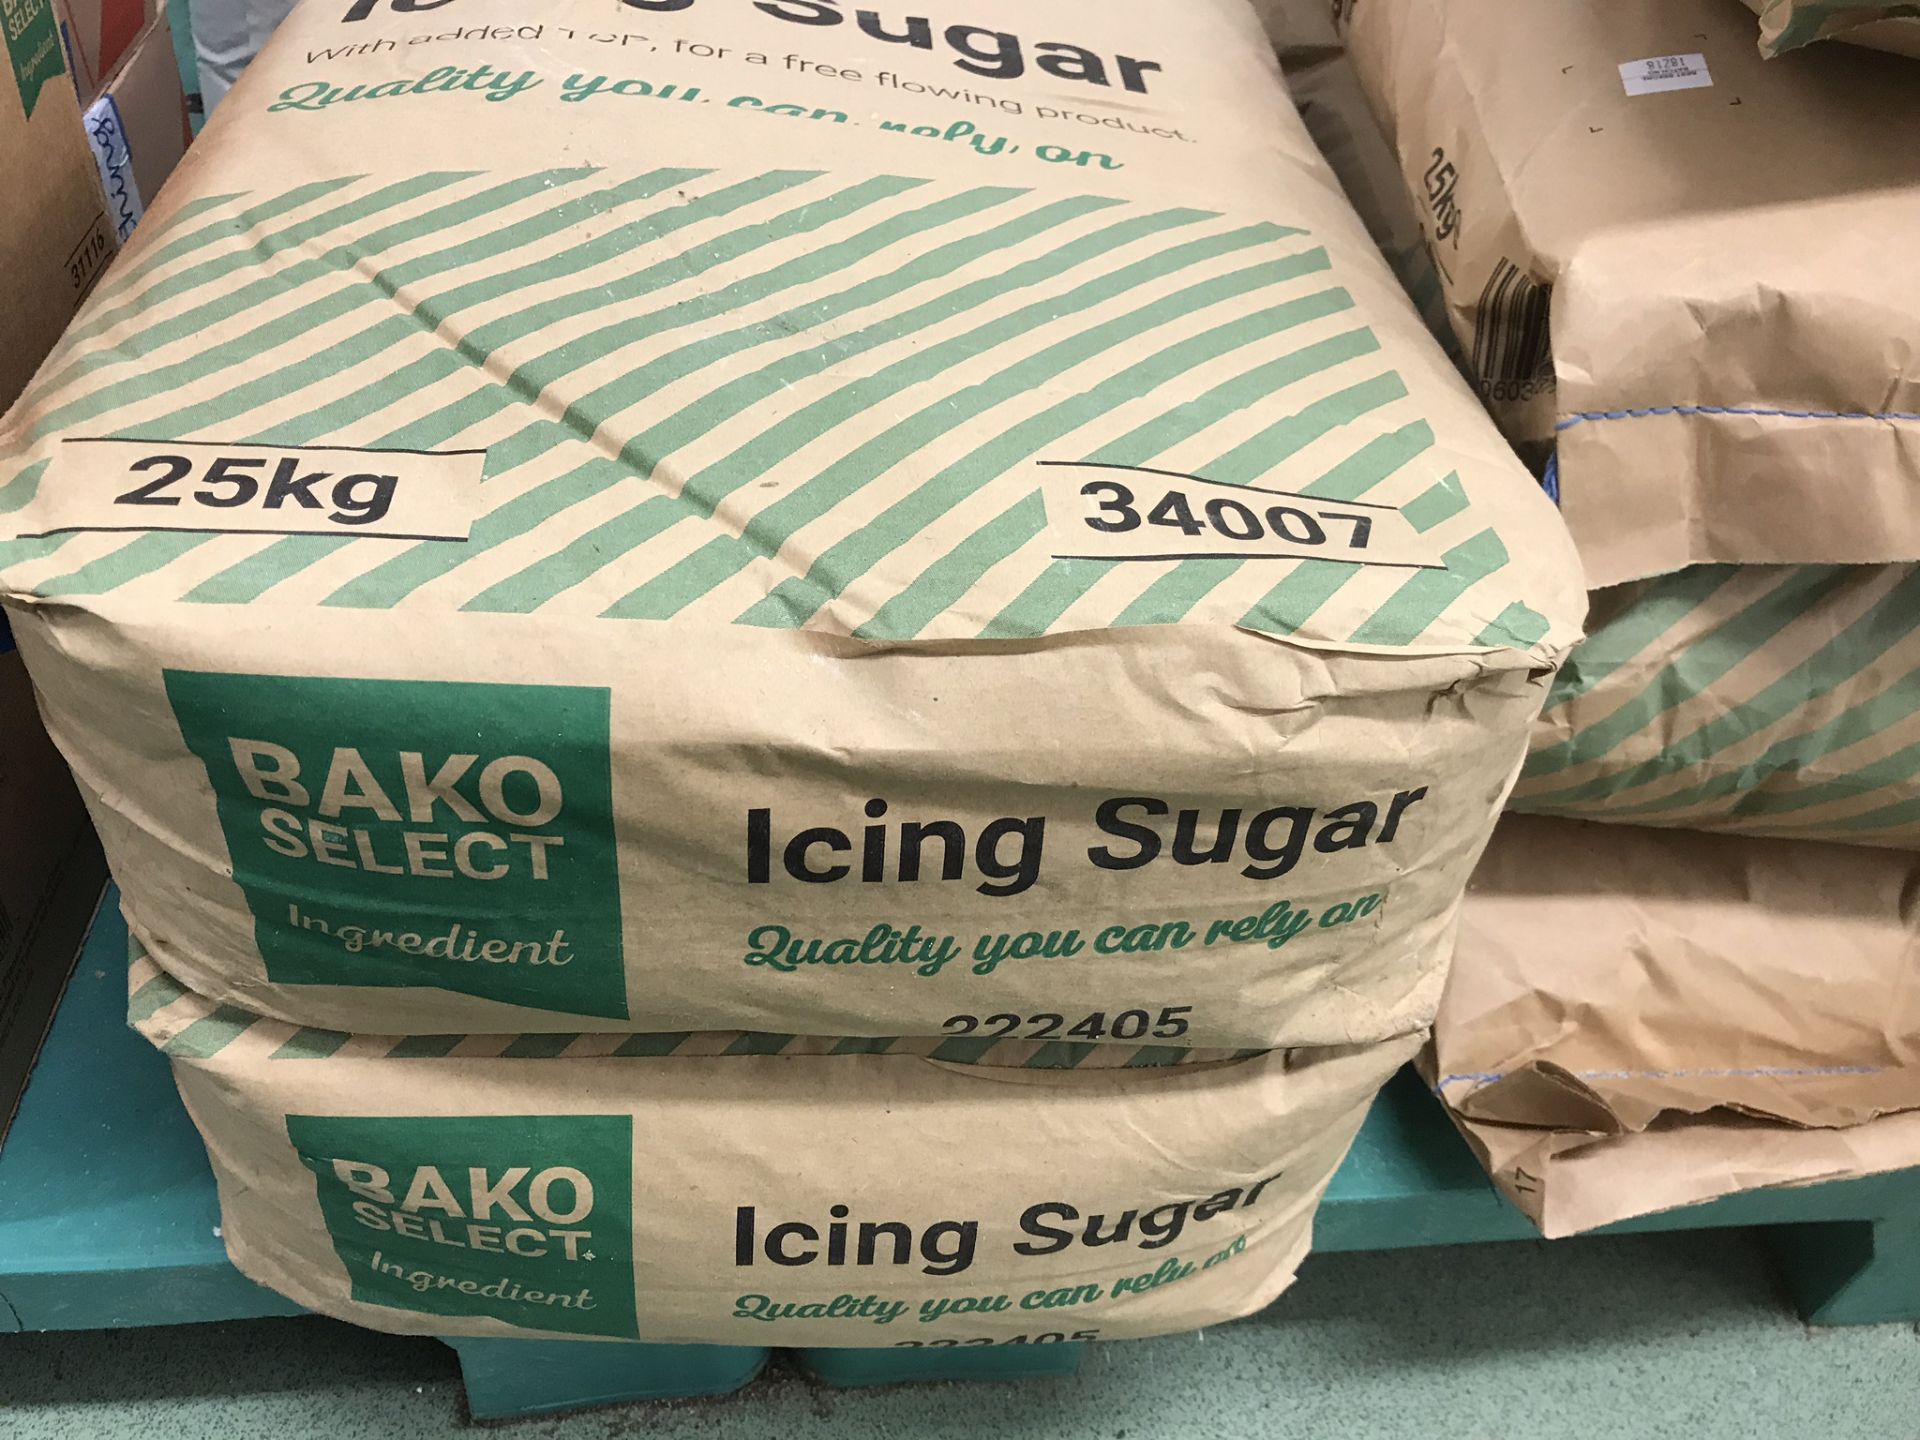 14 x 25kg Various Bags of Sugars - As Pictured - Image 12 of 12